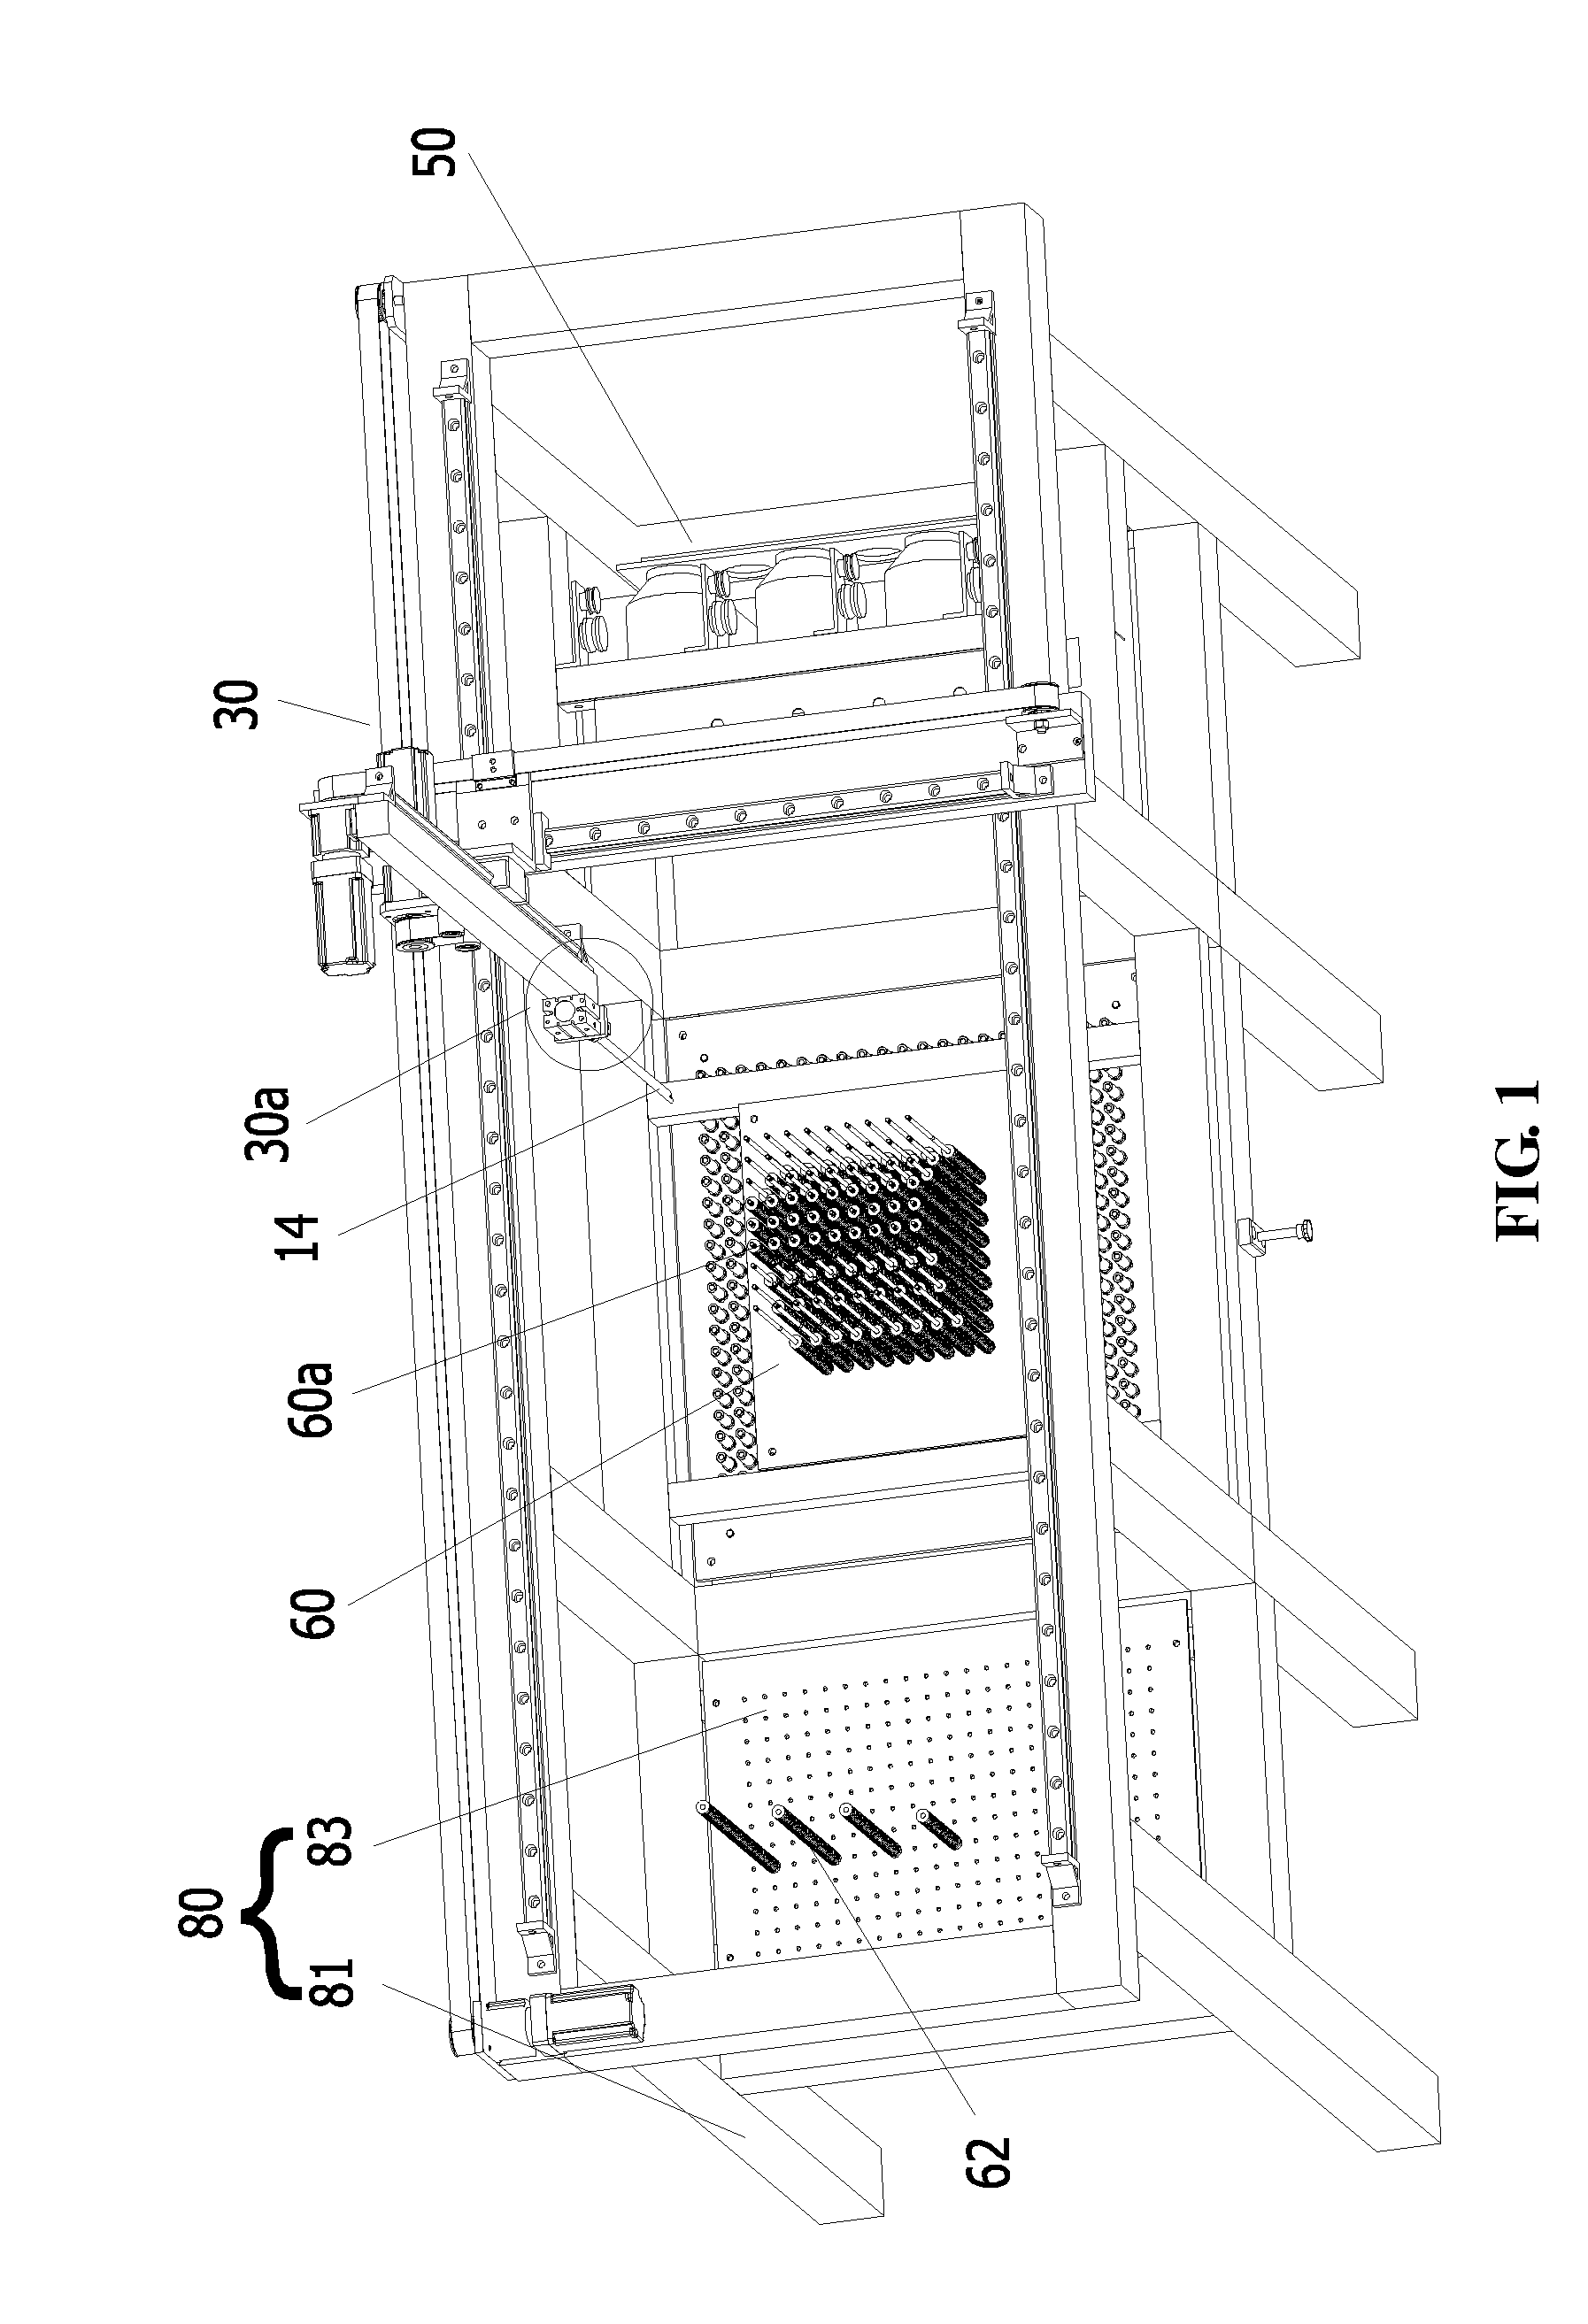 Multi-dimensional Weaving Shaping Machine of Composite Materials